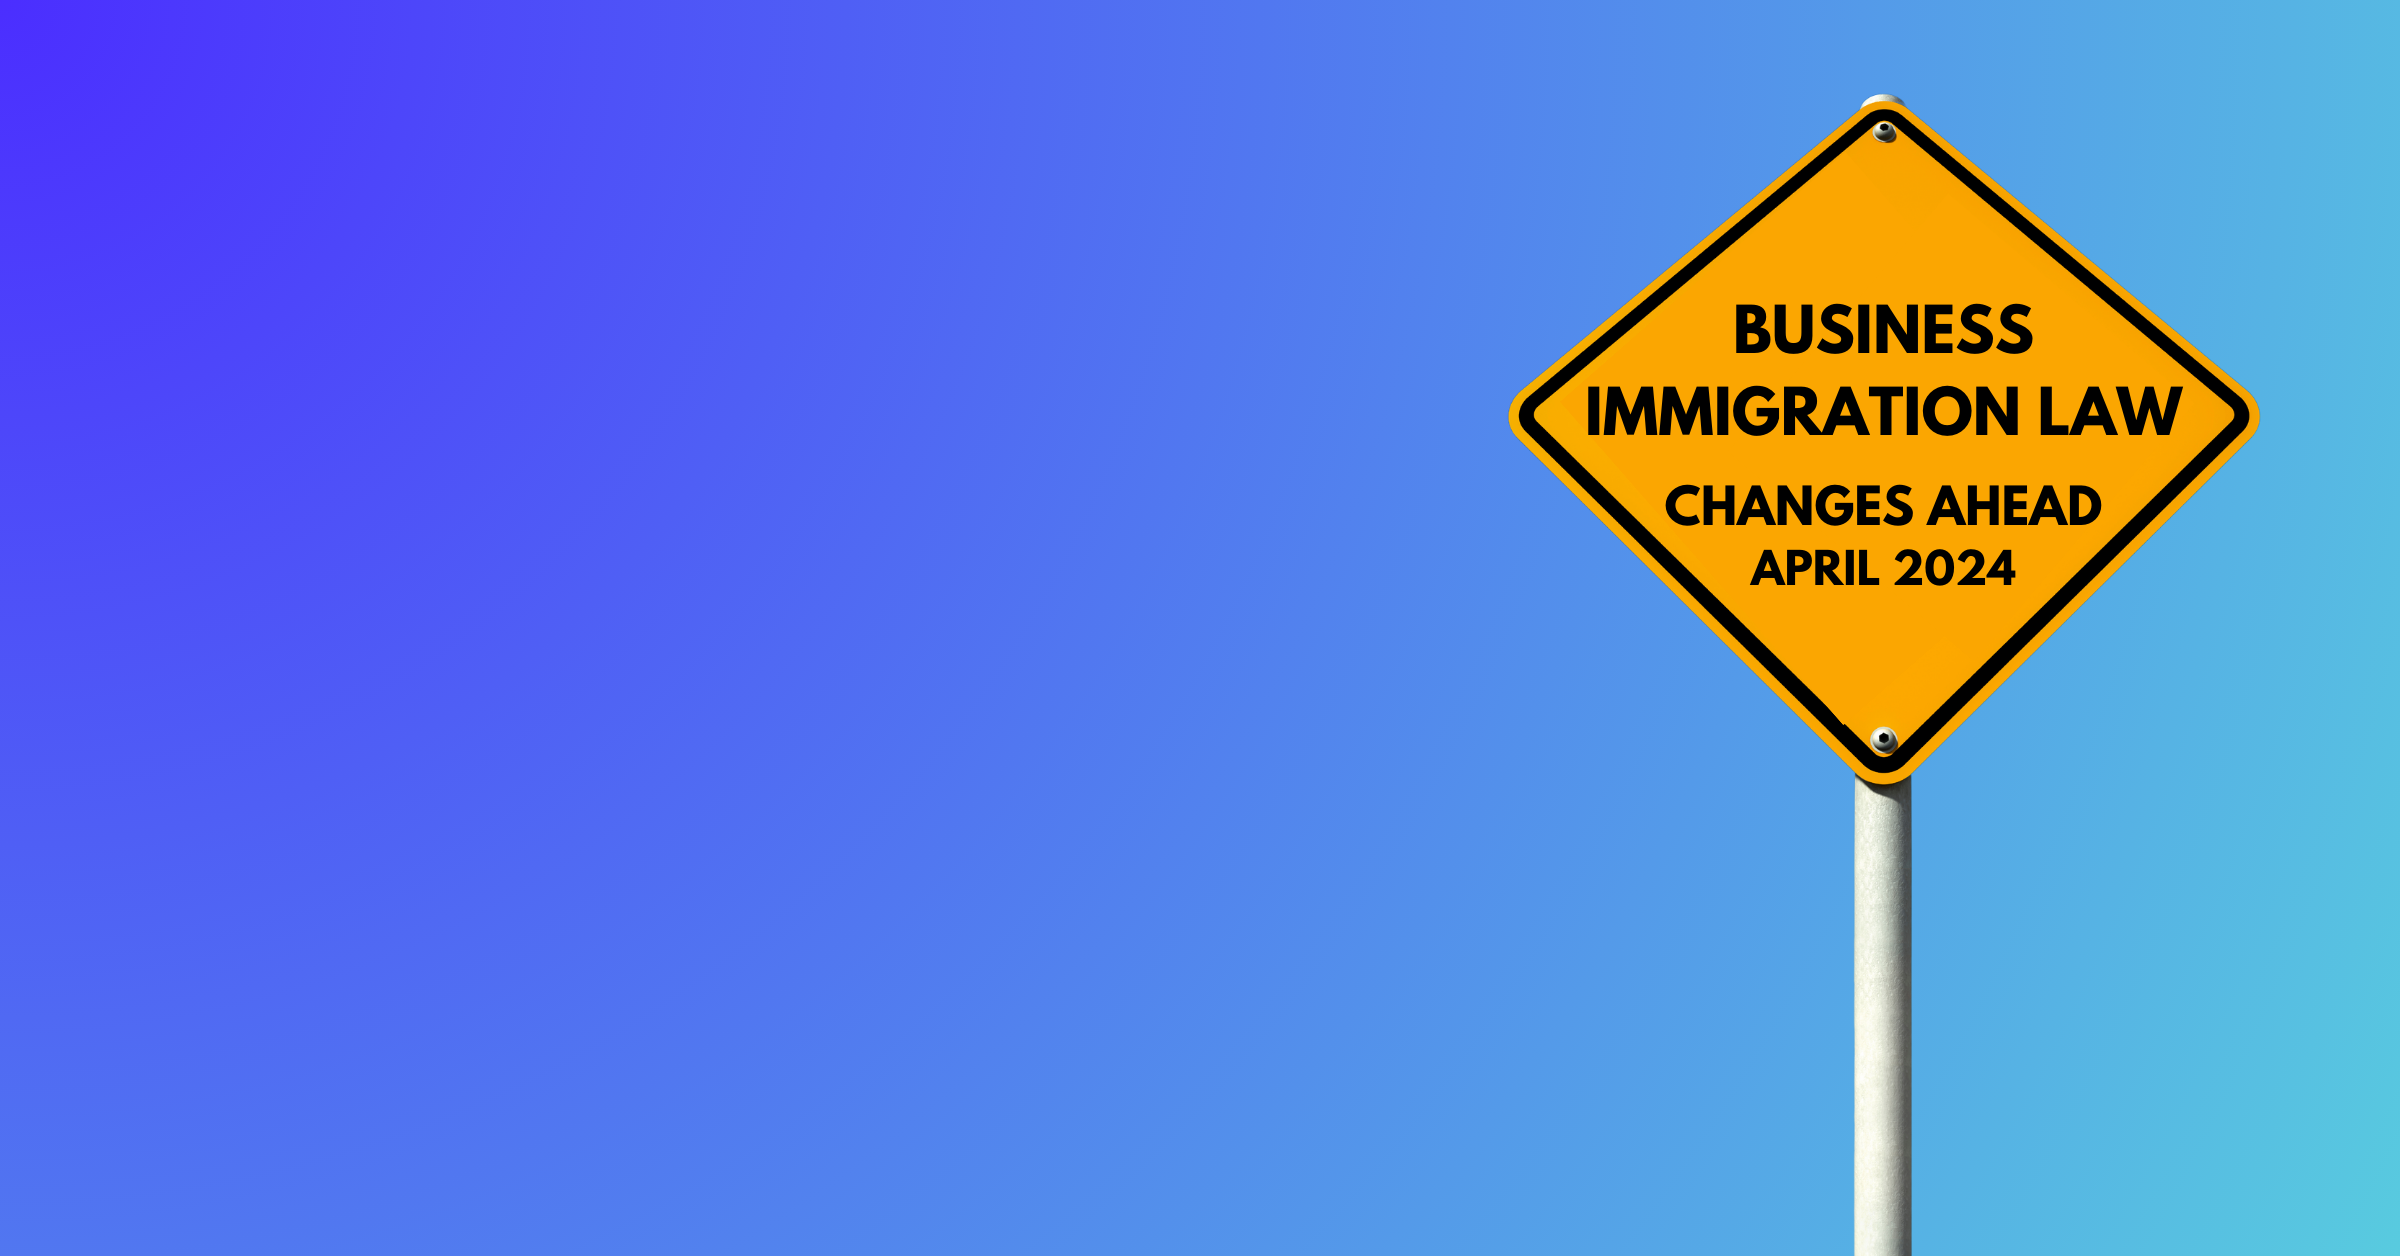 Immigration Rules Change For Skilled Workers and Sponsors - April 2024